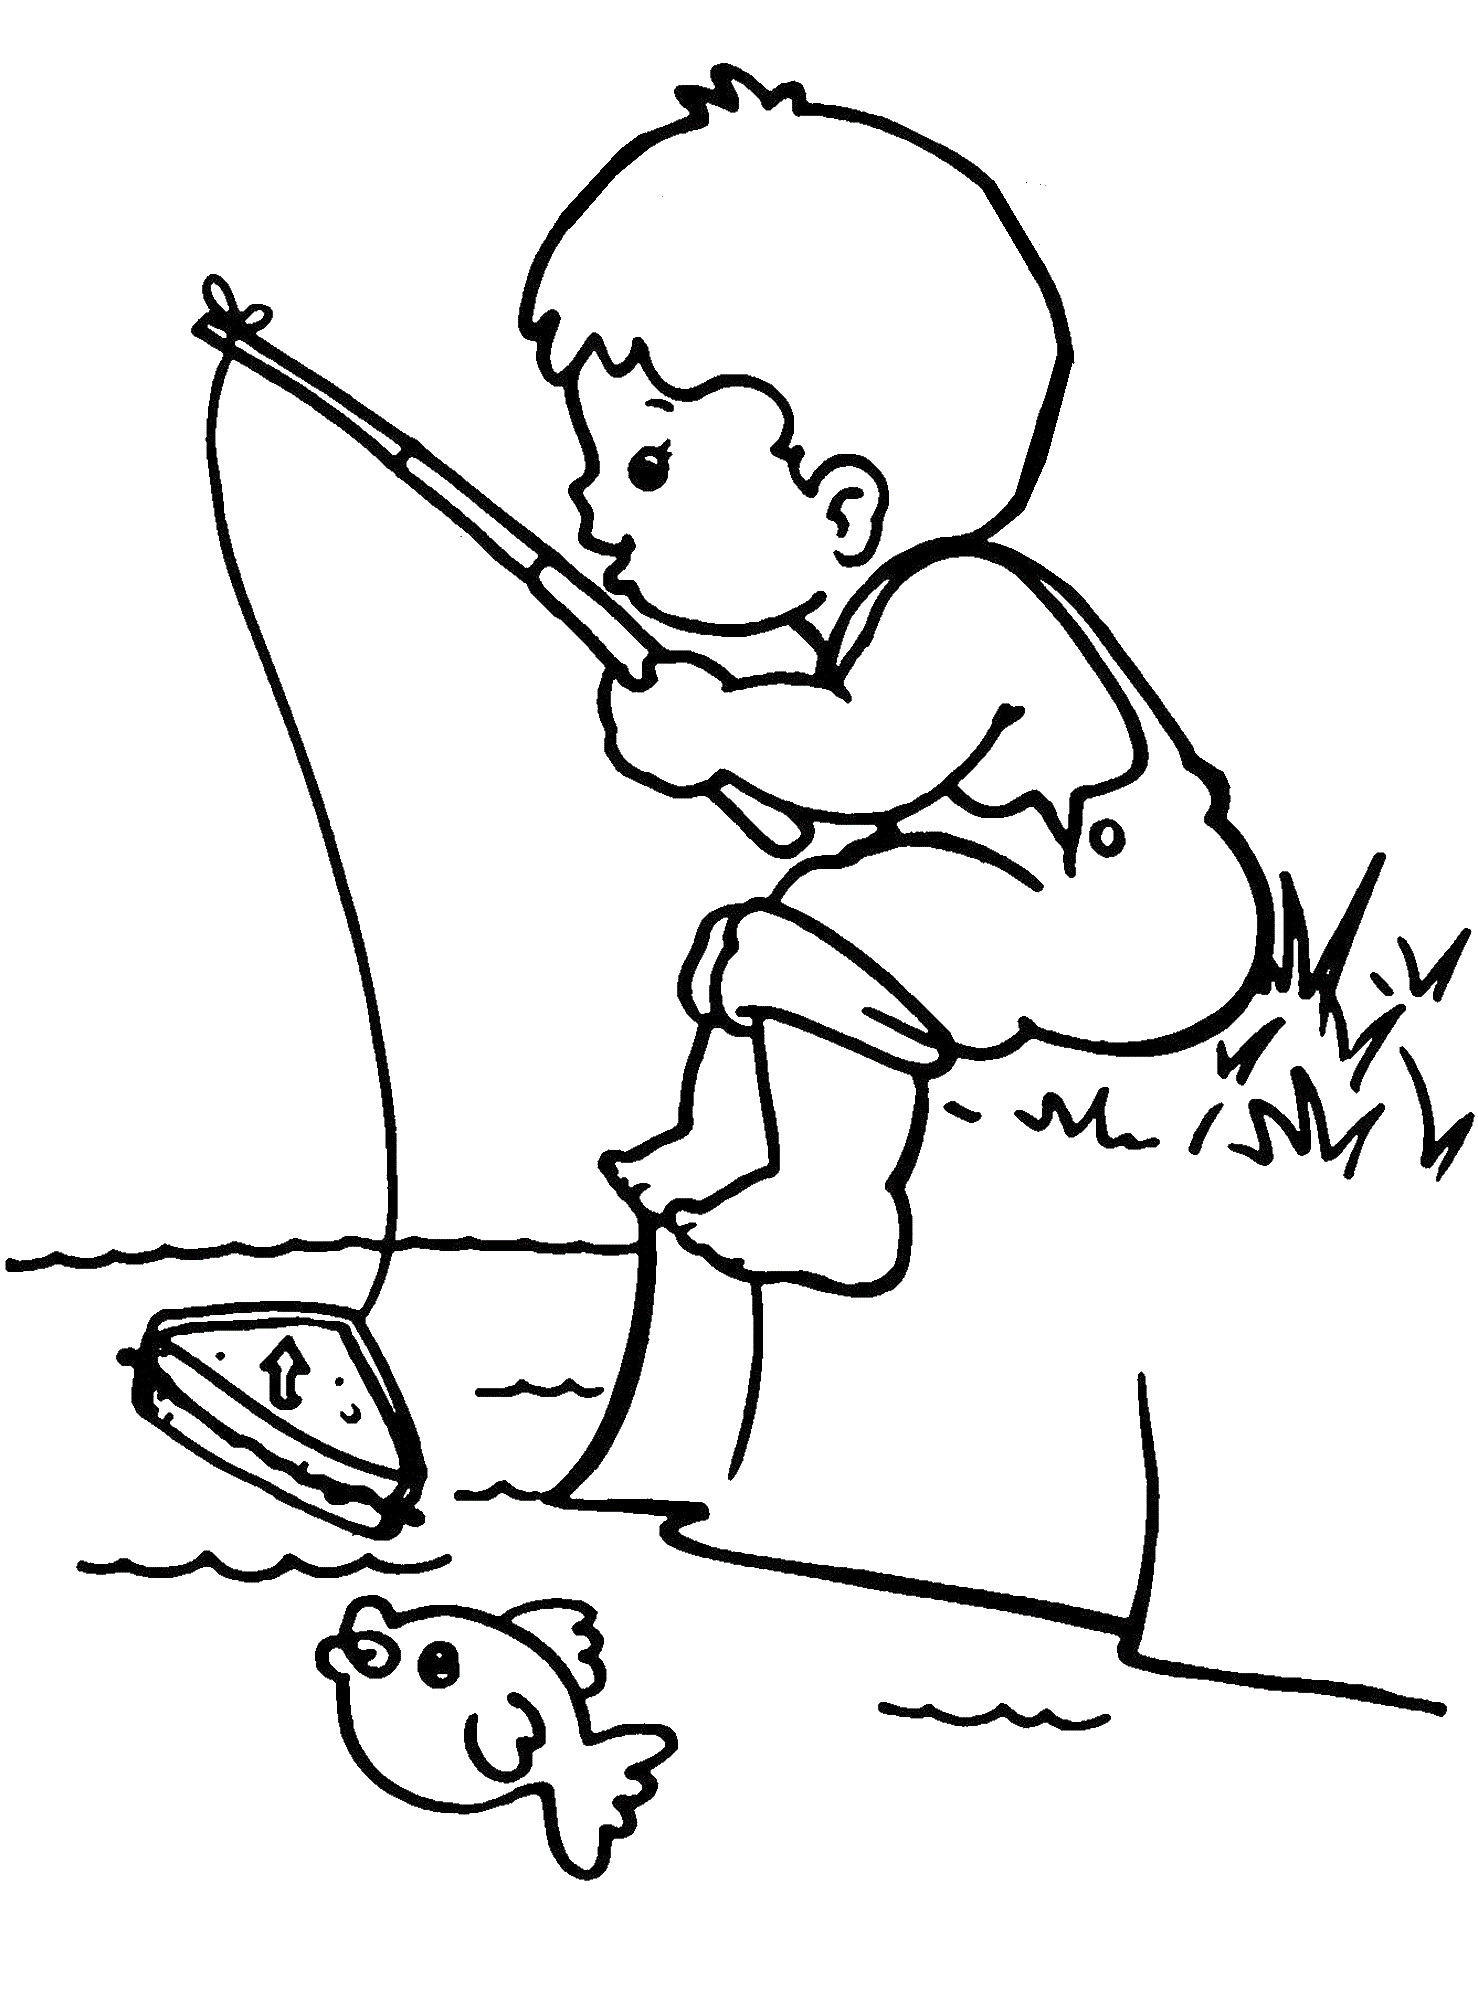 Kids Coloring Sheets For Boys
 Fishing Coloring Pages Best Coloring Pages For Kids